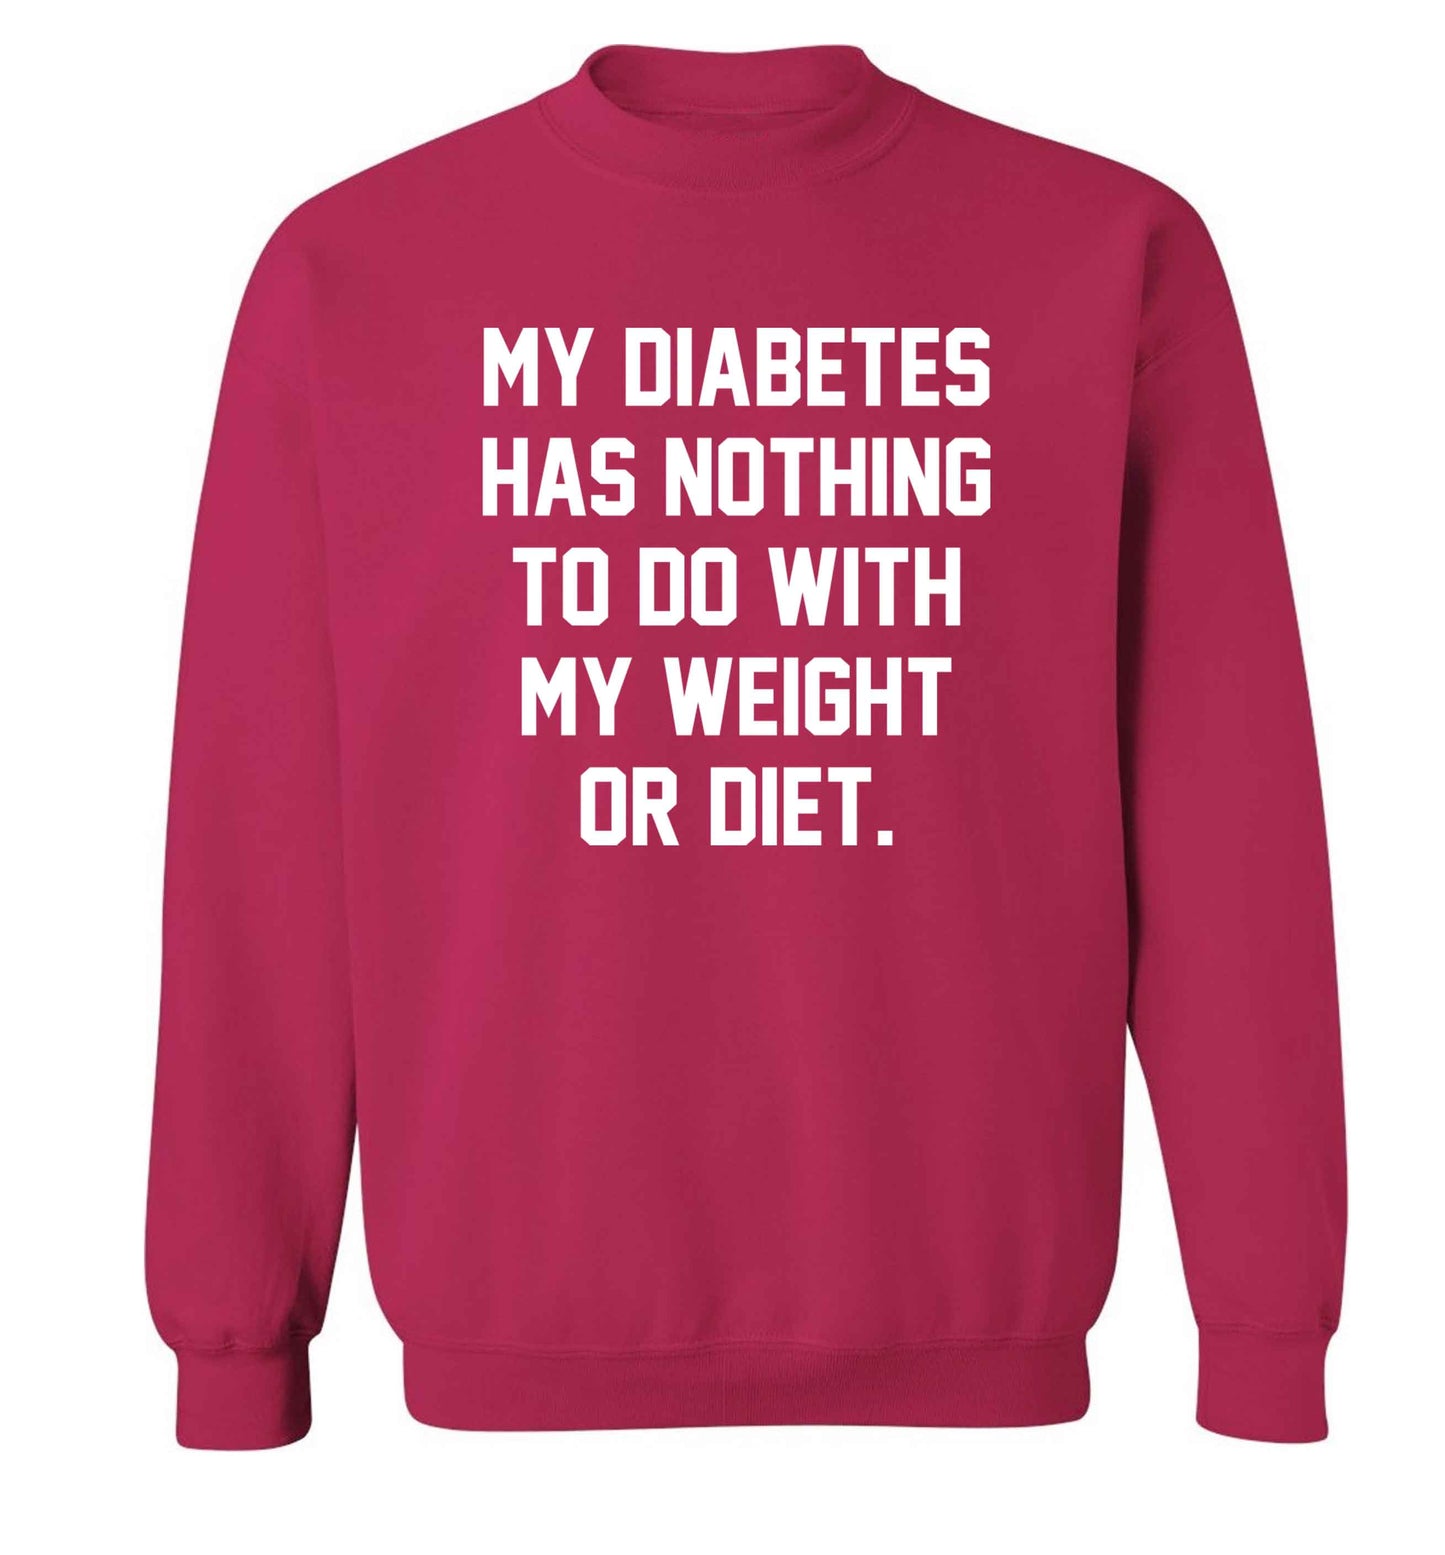 My diabetes has nothing to do with my weight or diet adult's unisex pink sweater 2XL